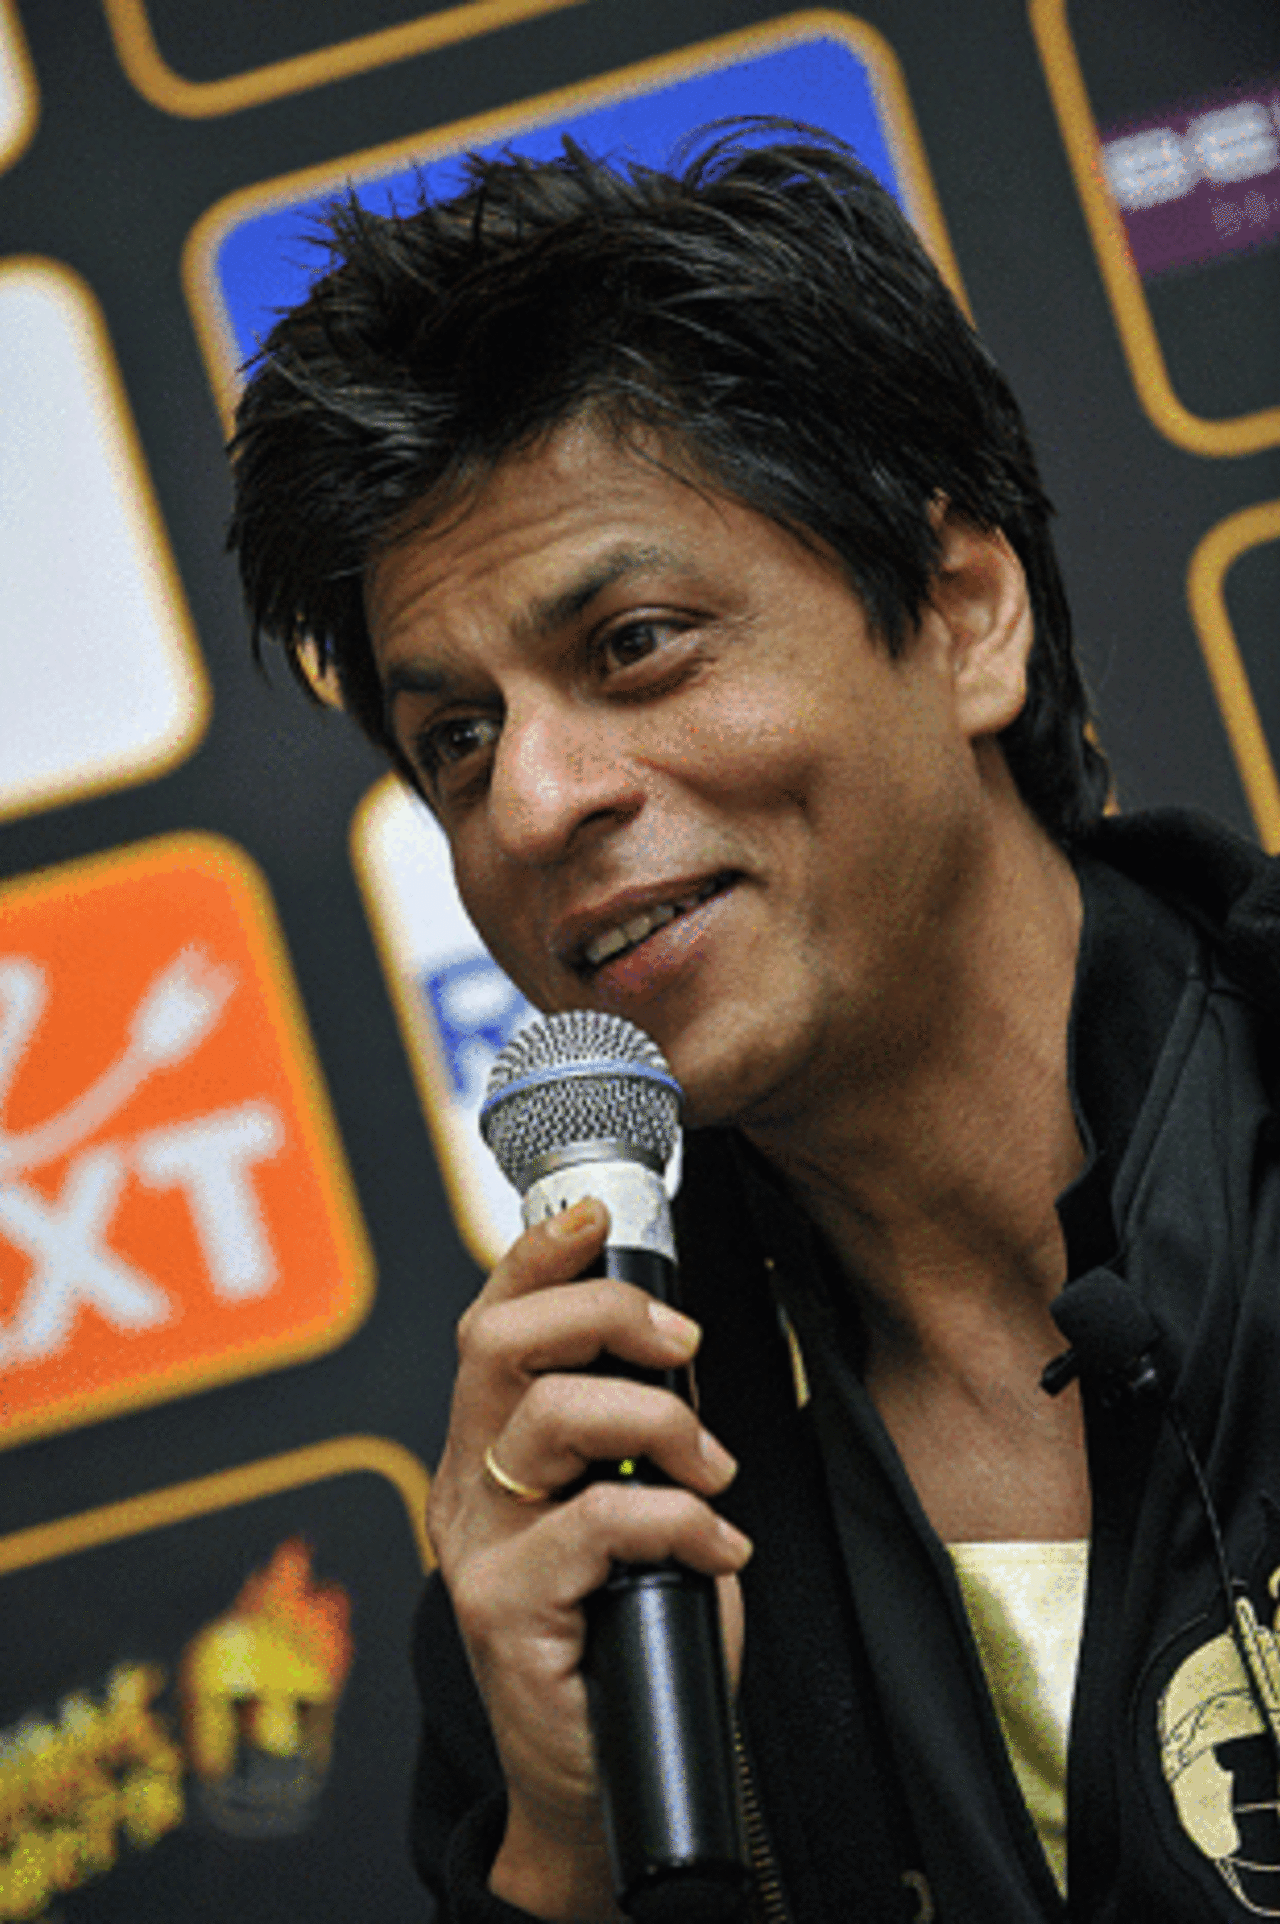 Shah Rukh Khan speaks at a press conference, Cape Town, April 14, 2009